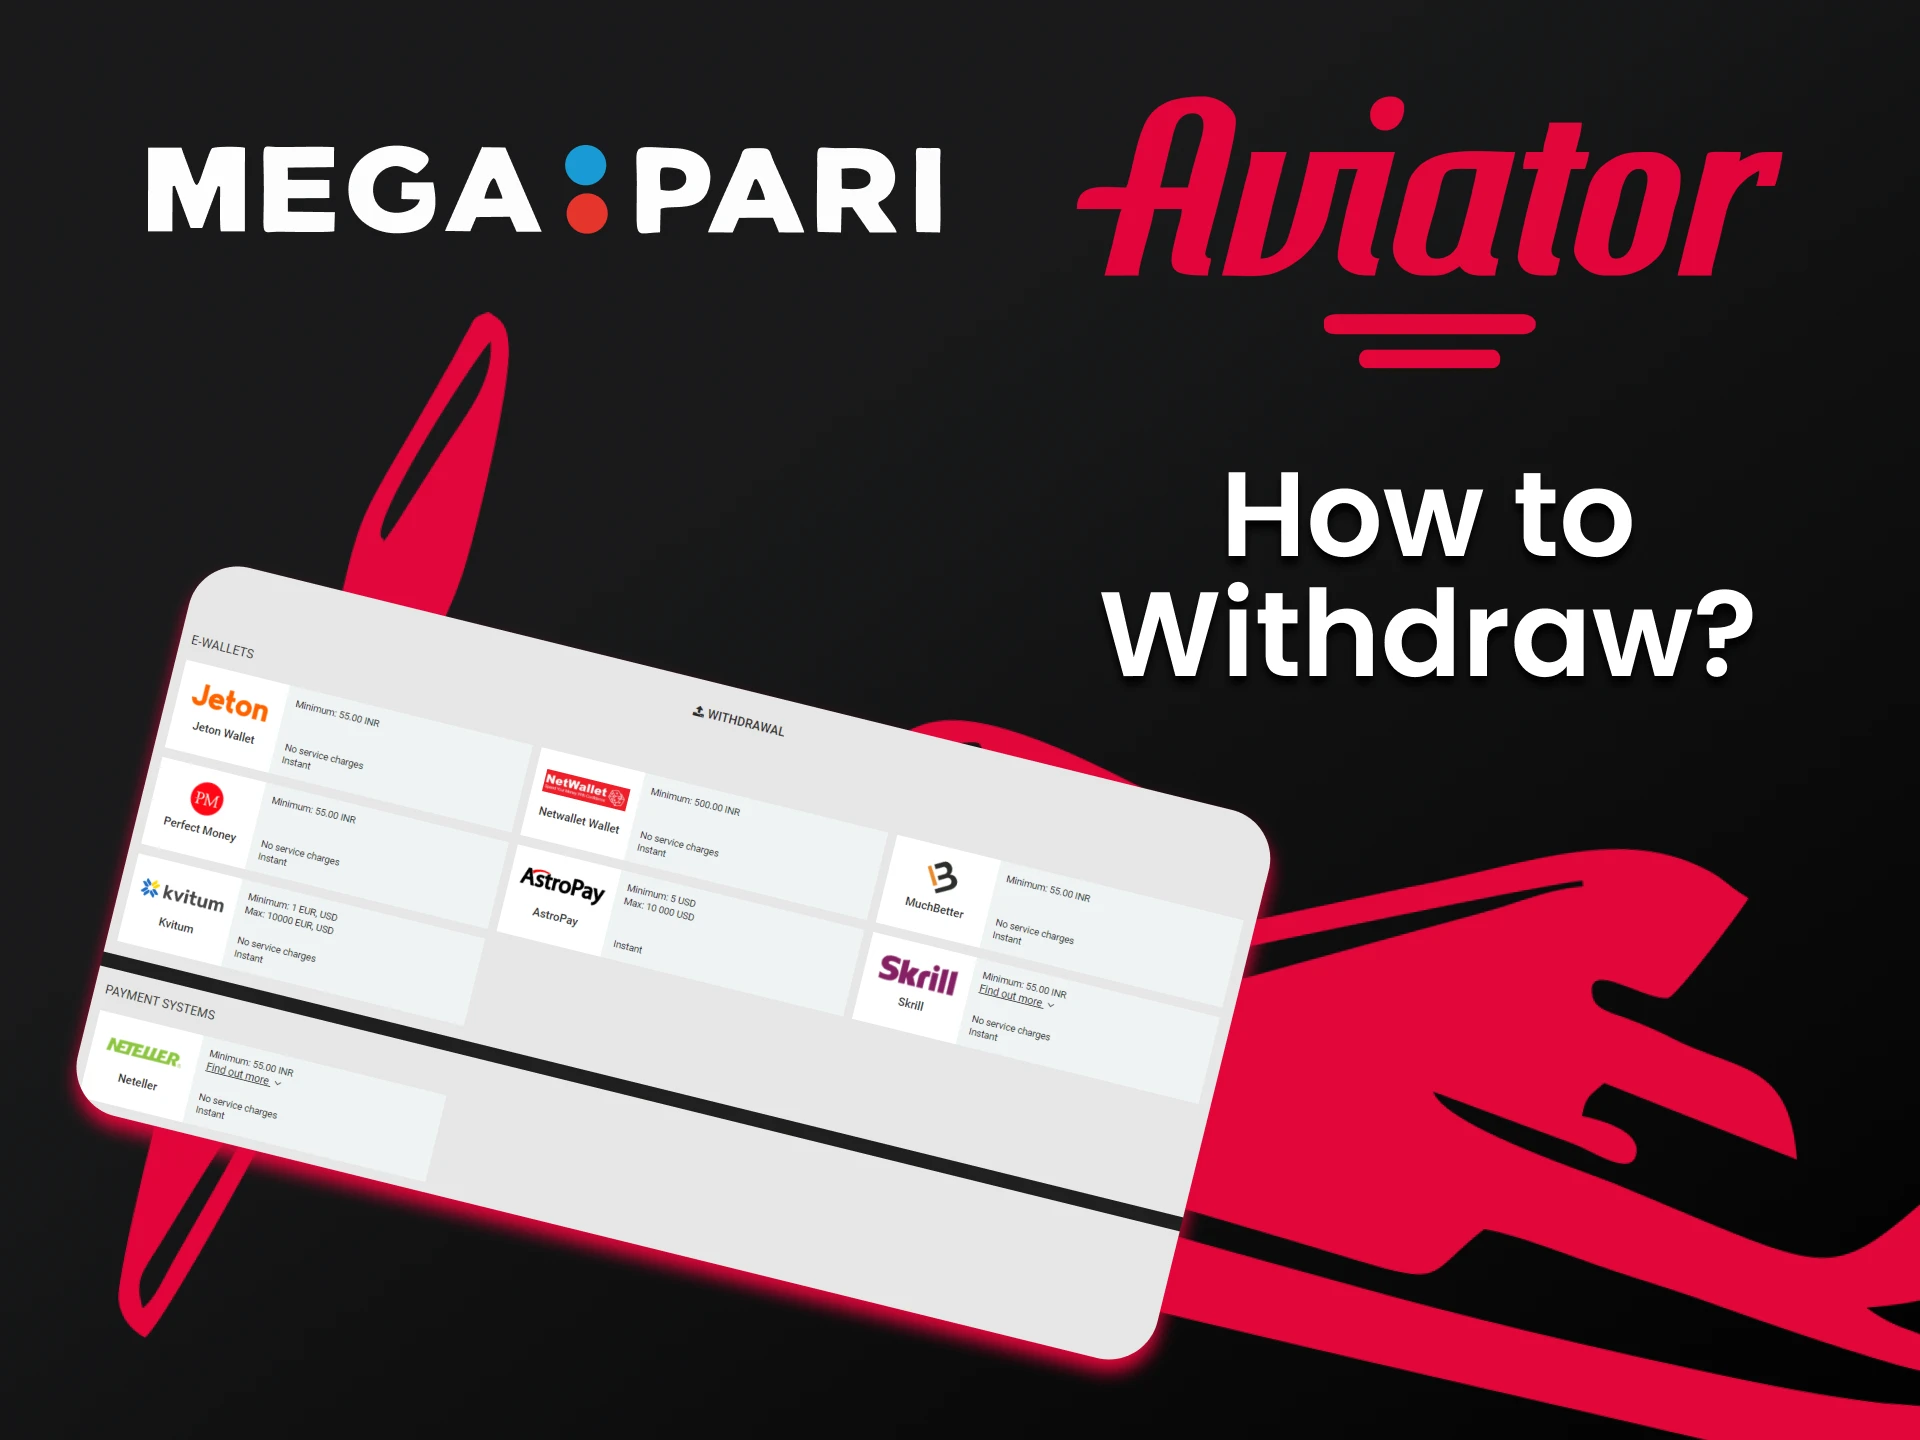 Choose a convenient way to withdraw funds from Megapari.